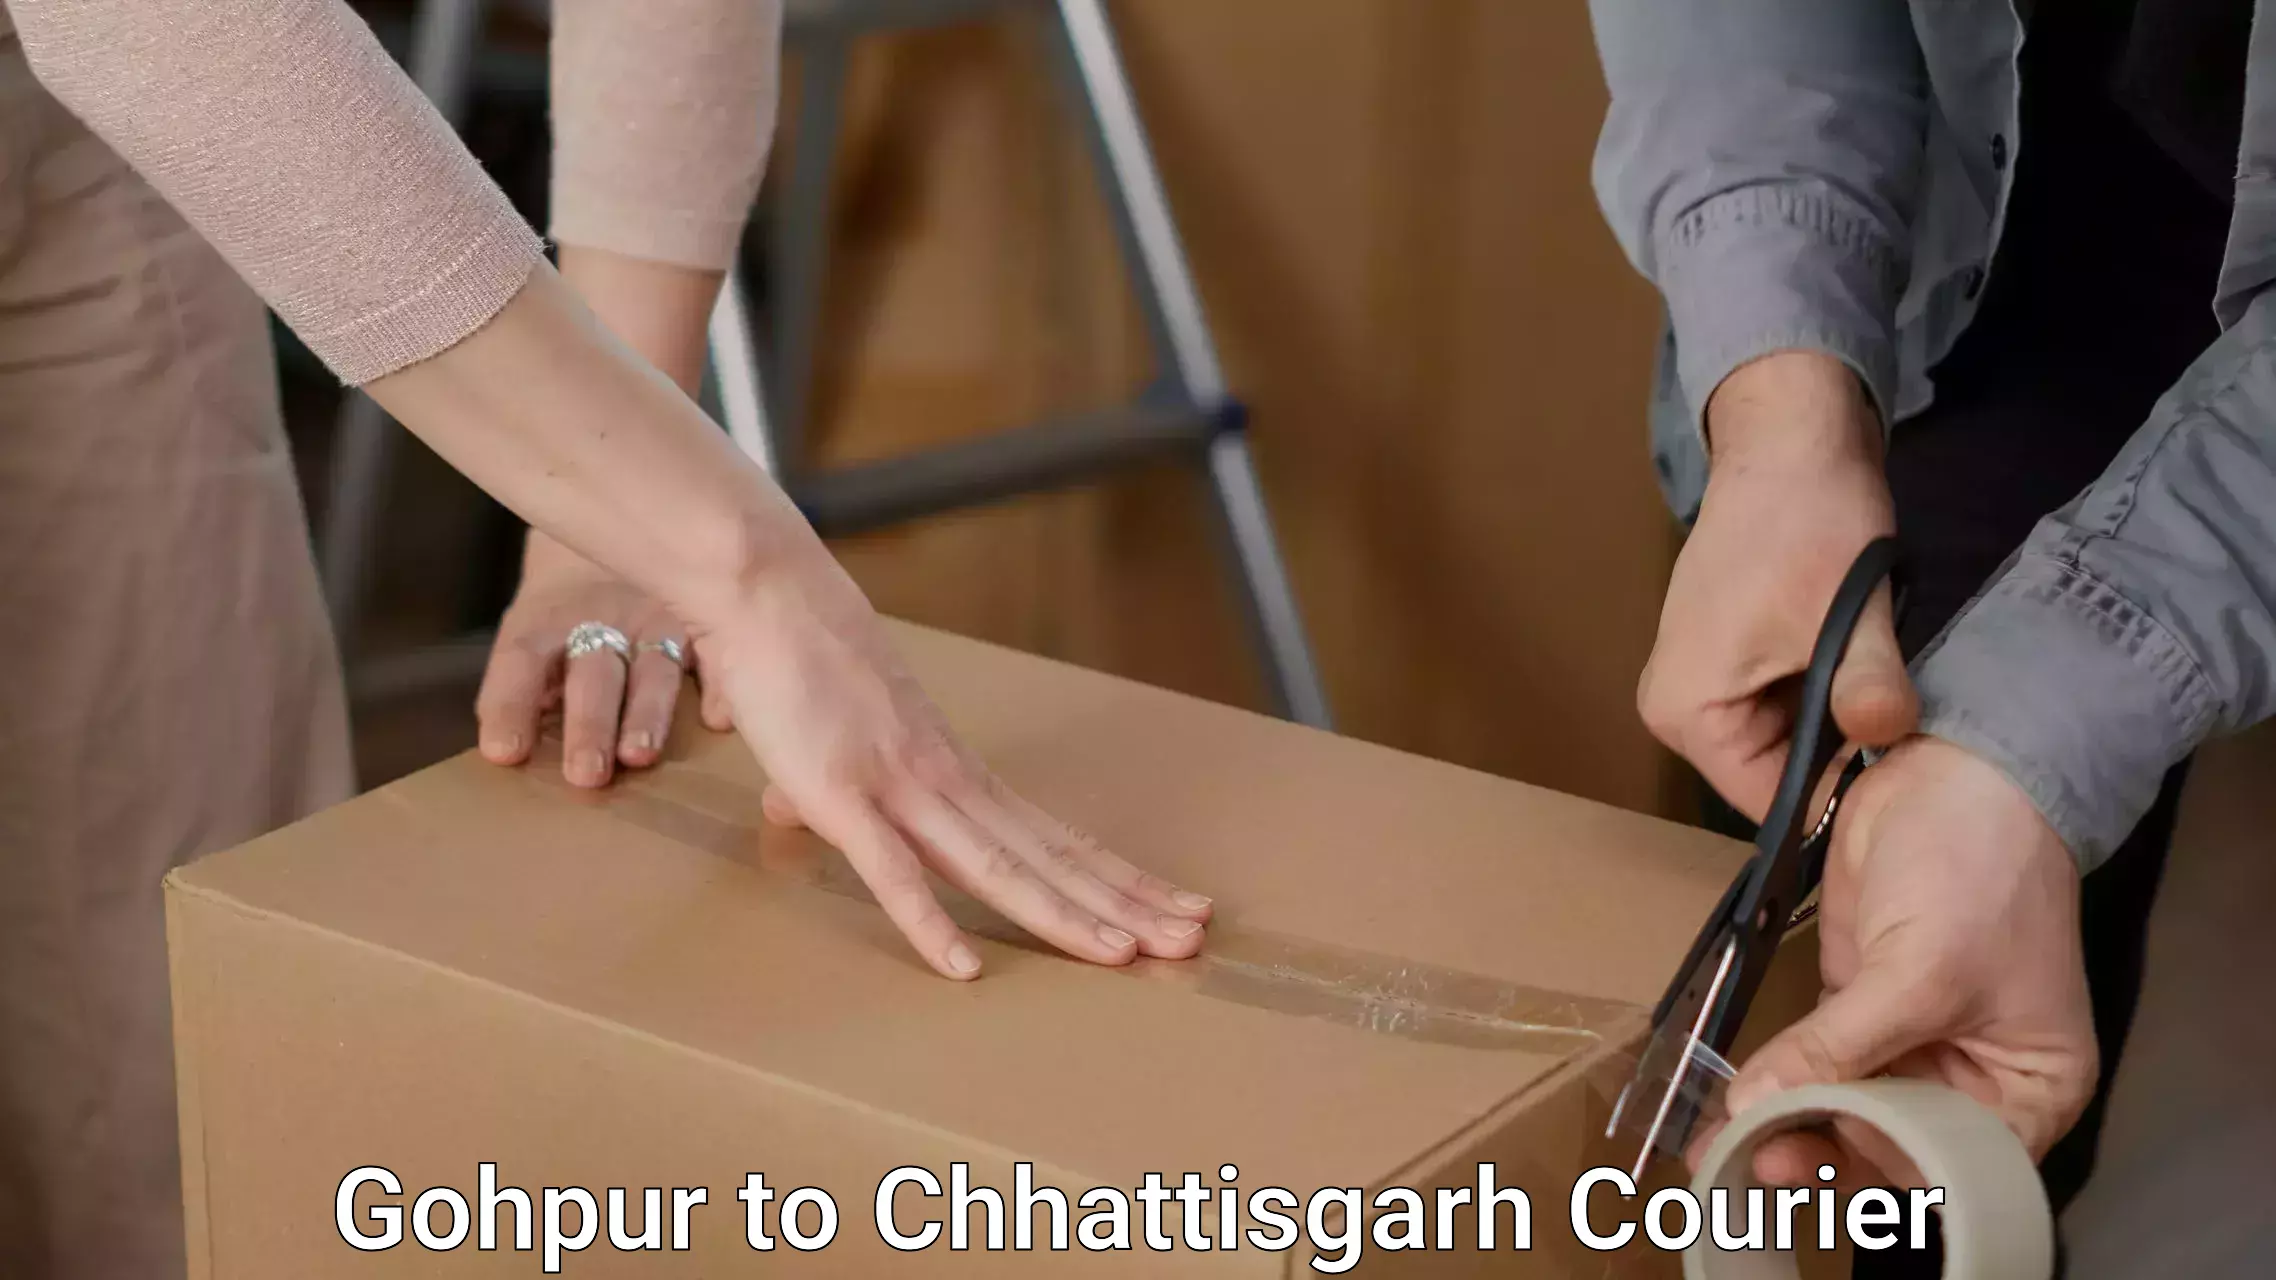 Quality relocation assistance in Gohpur to Chhattisgarh